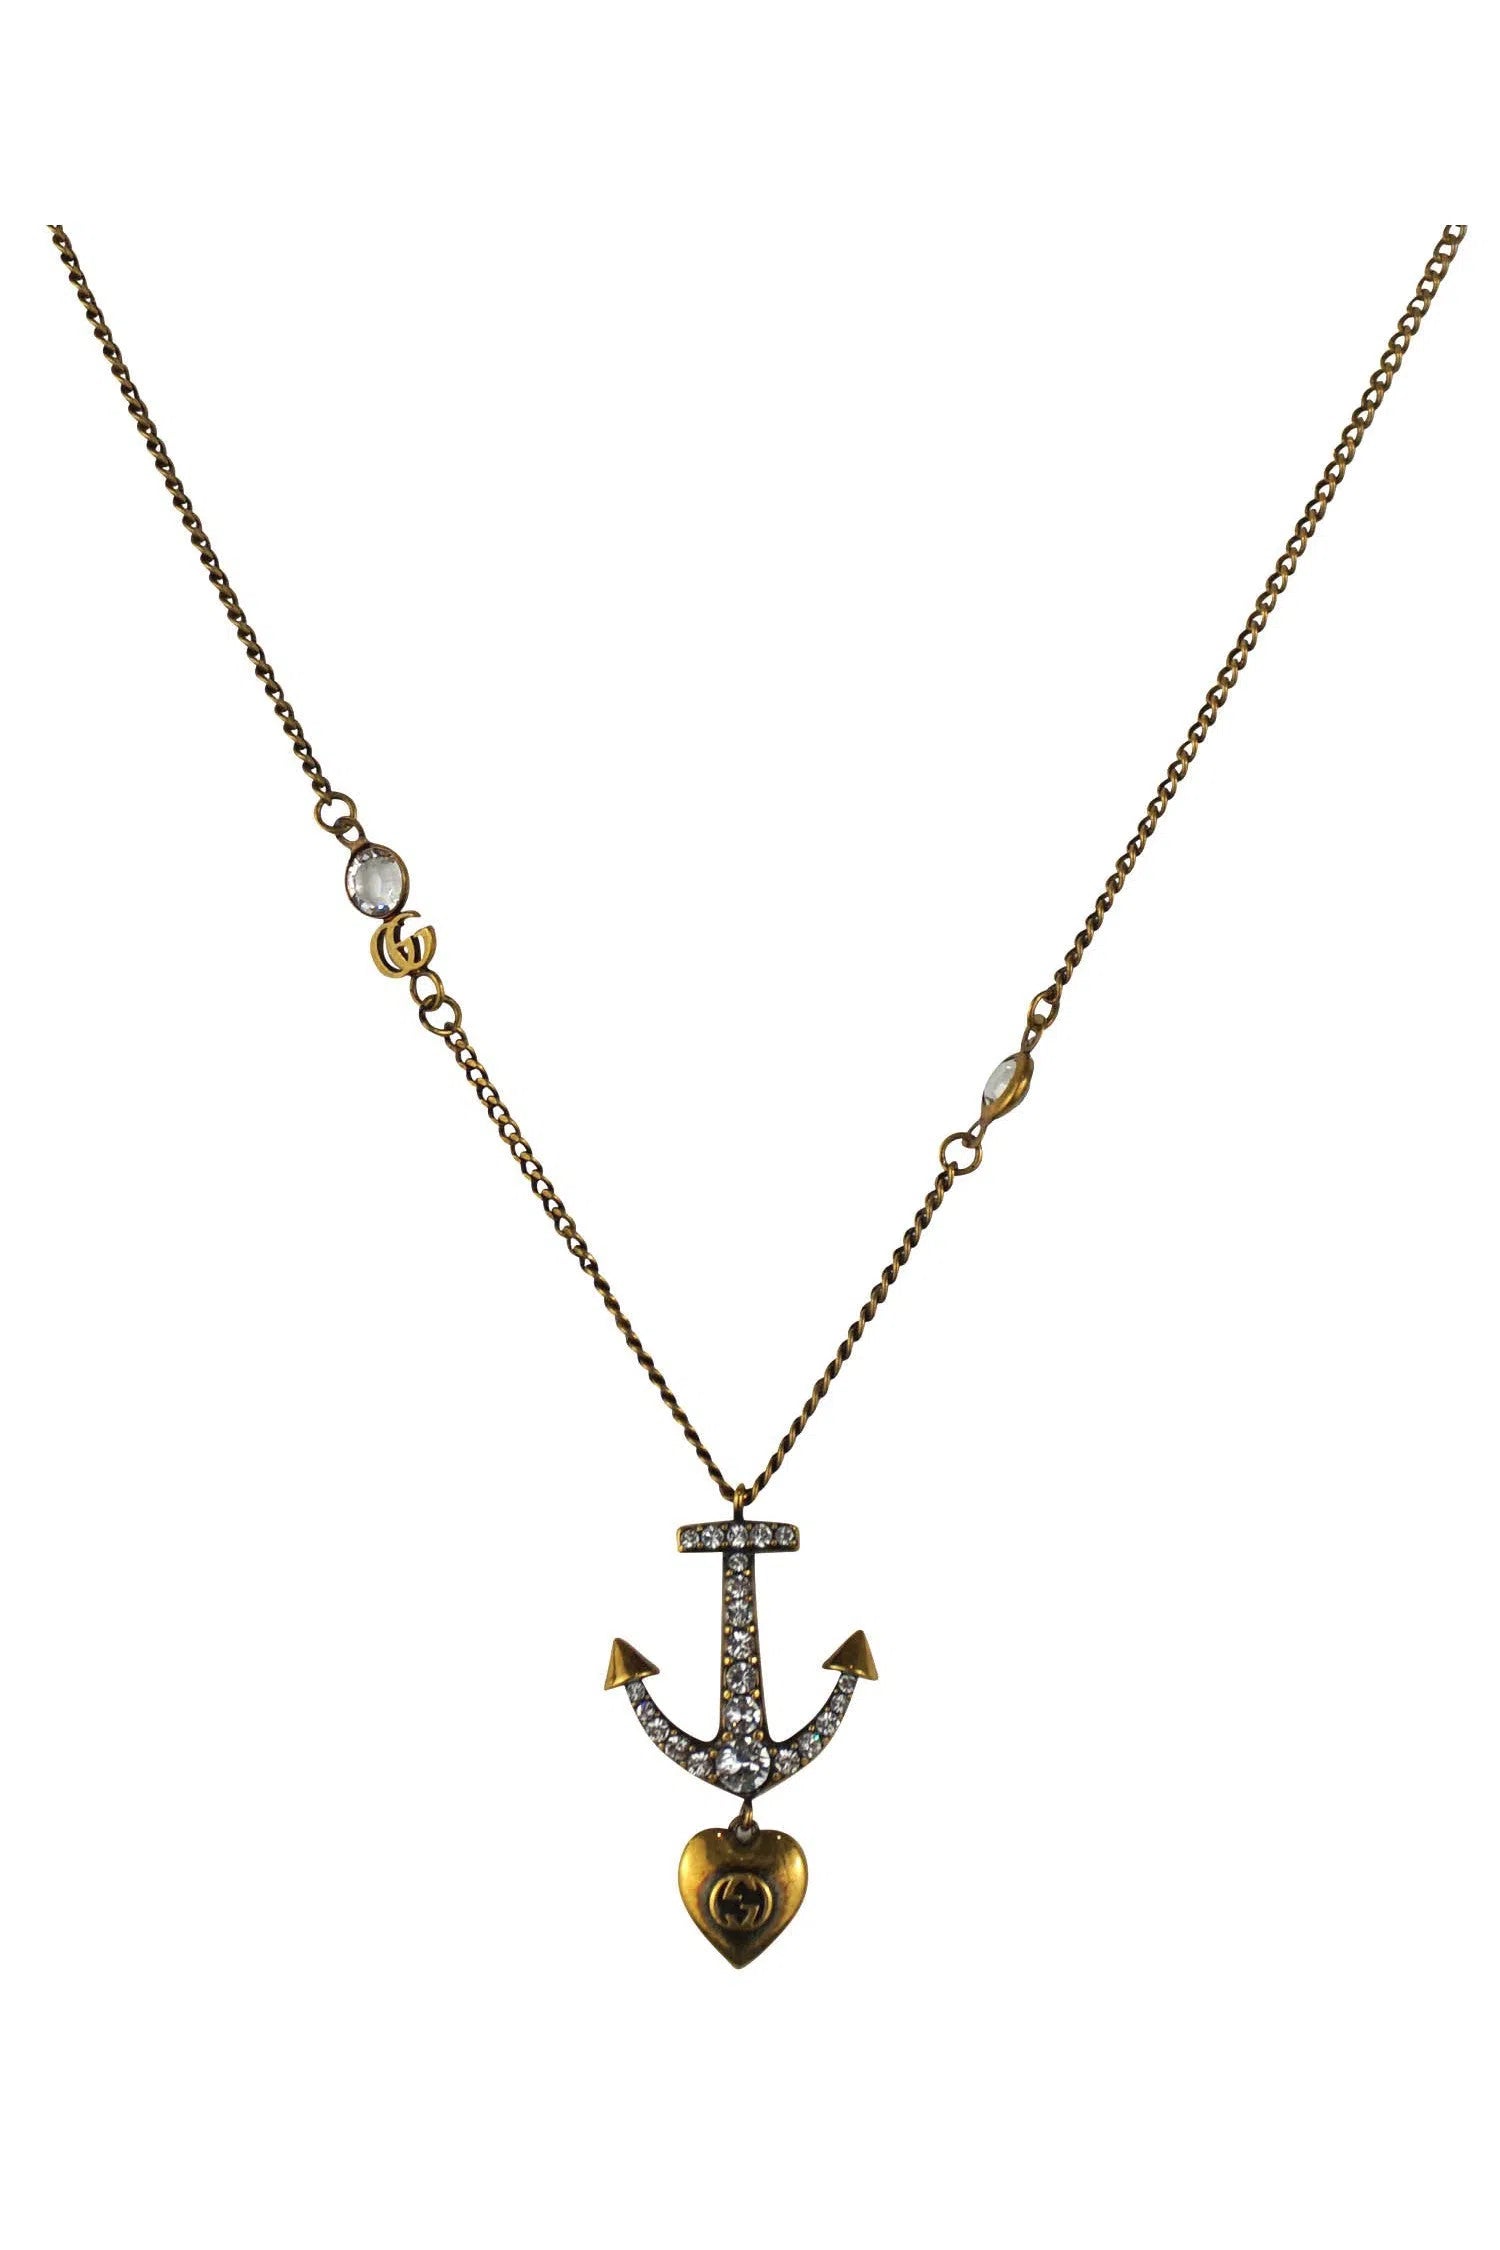 Gucci Crystal Anchor Pendant Necklace - Foxy Couture Carmel